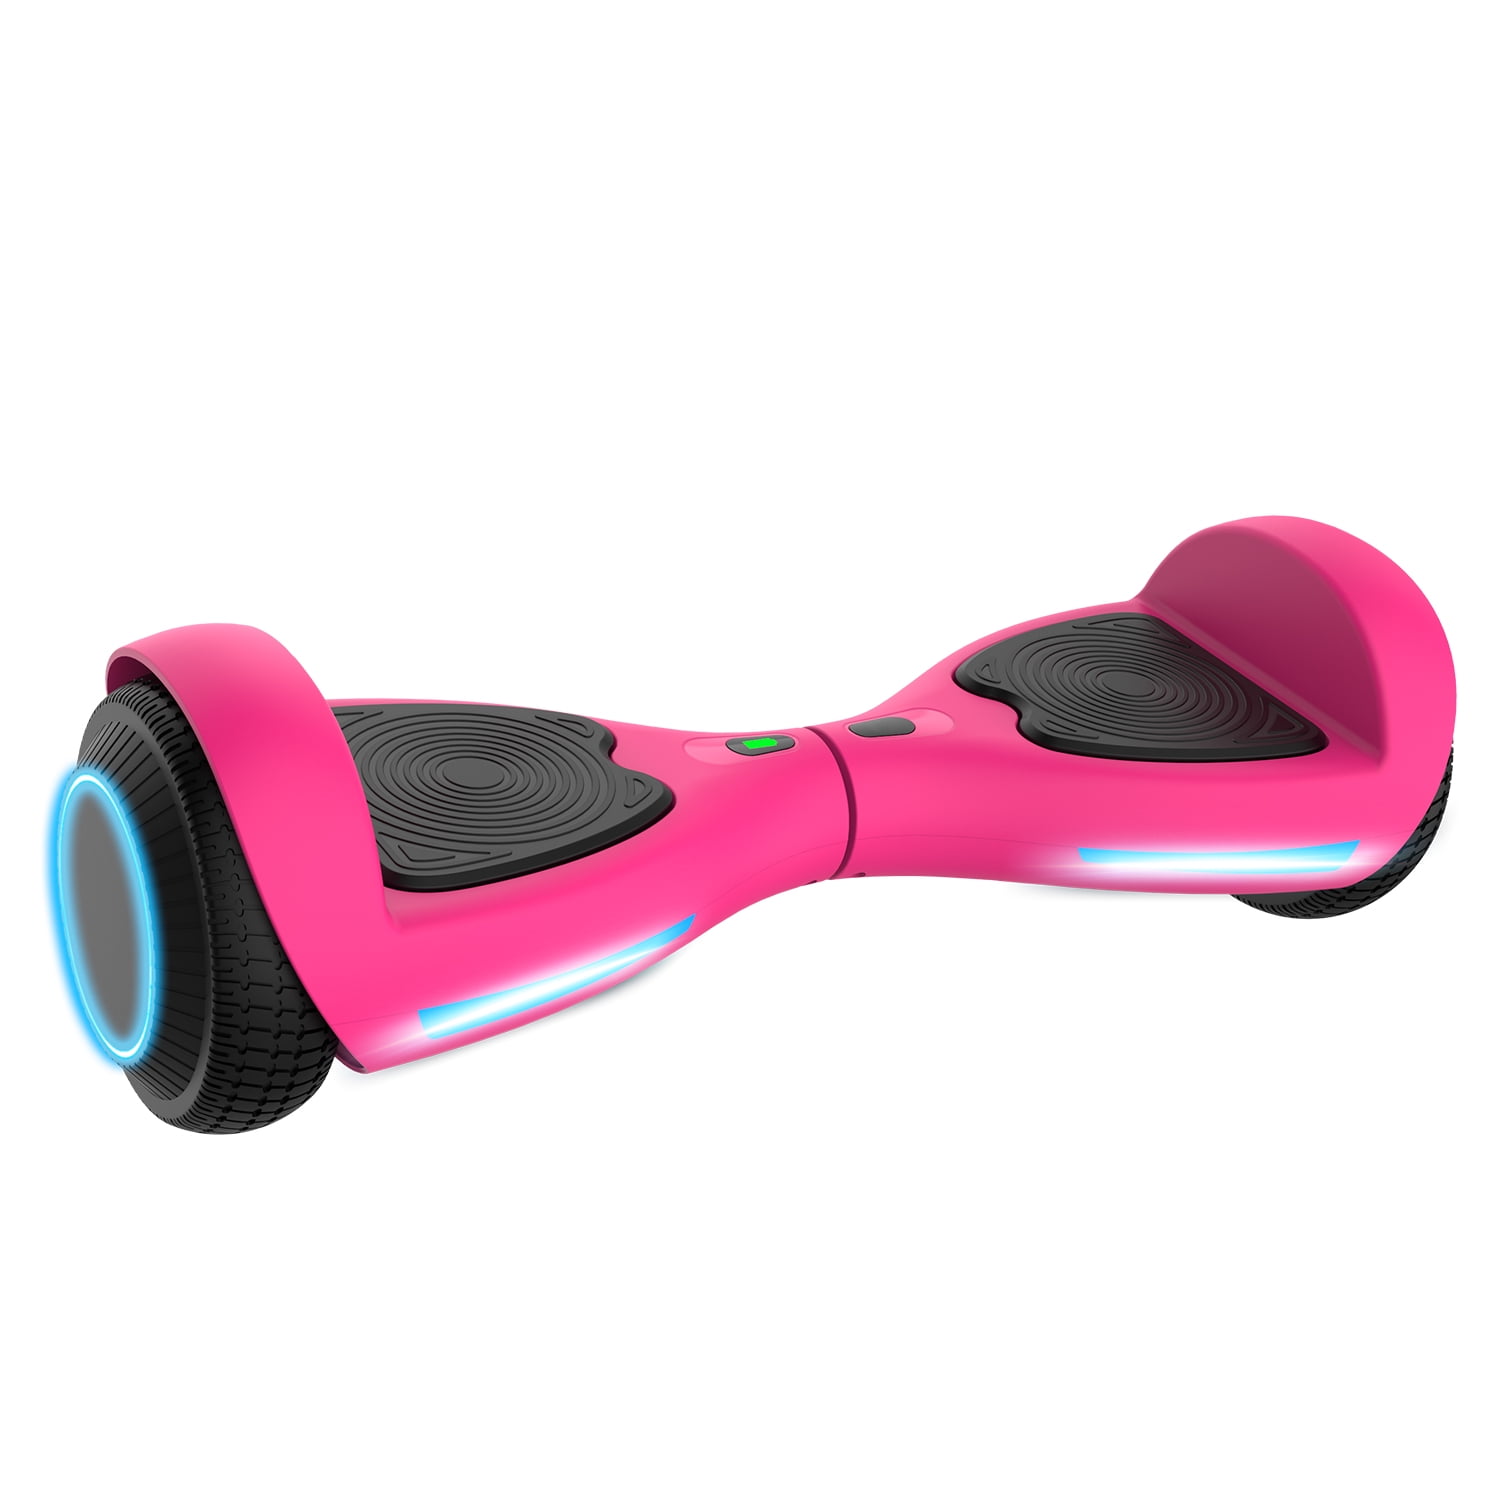 Fluxx FX3 LED Hoverboard UL2272 Hover Board with Self Balancing Mode Pink 